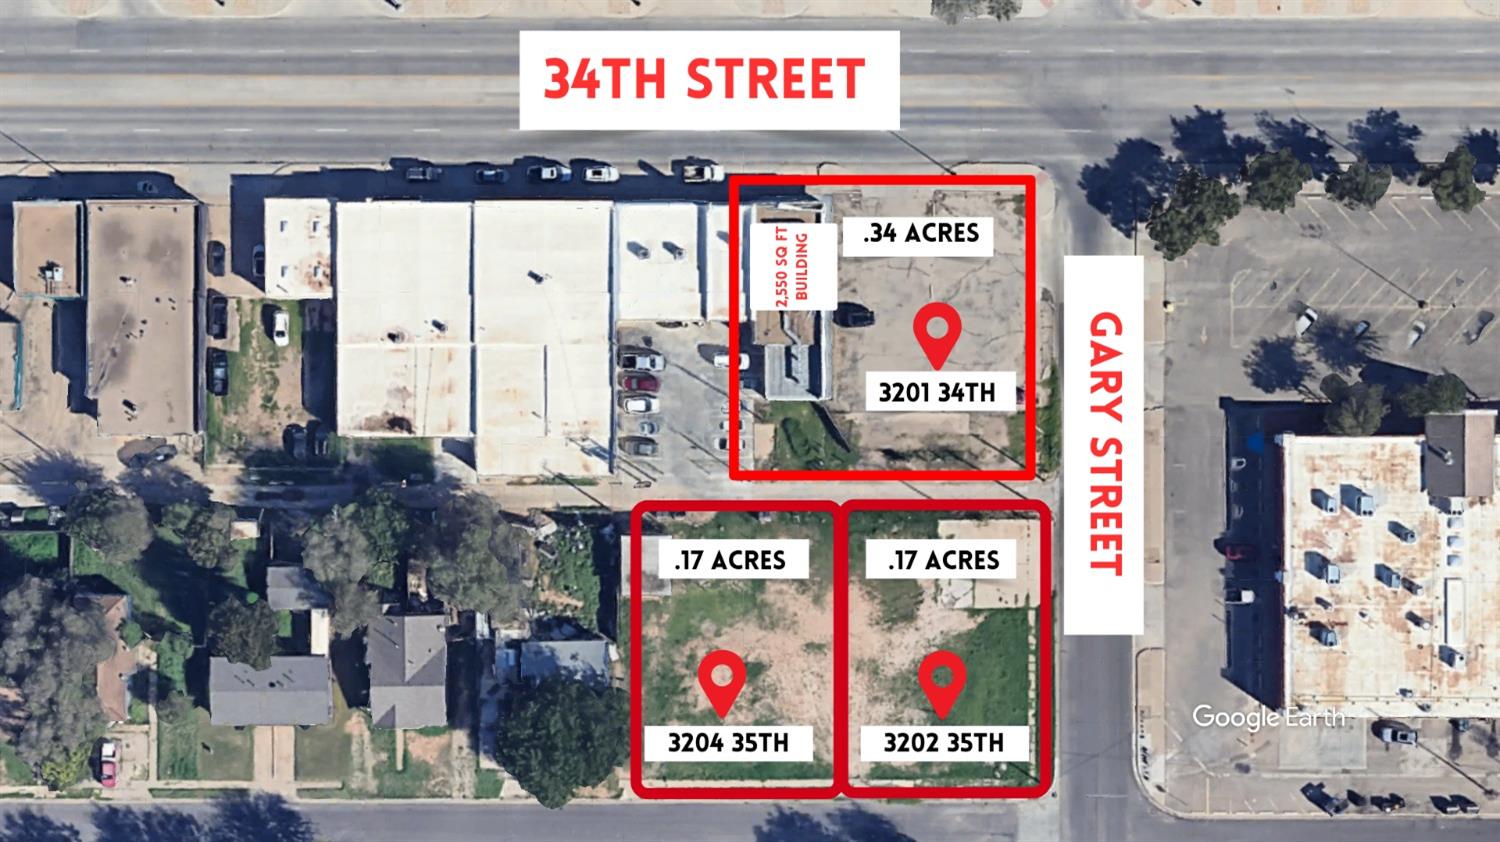 Multifaceted opportunity to own commercial space right by Tech Terrace with prime 34th street frontage and parking. Additional lots packaged with the property are zoned multi-family but could also be used for parking depending on the business needs. The building is 2,550 square foot and has already been through the remediation process. Seller planned on adding square footage and turning this entire package into a unique restaurant spot for central Lubbock. Frontage parking lot and building could be utilized as one investment strategy, with the back multi-family lots as another. The possibilities are endless!